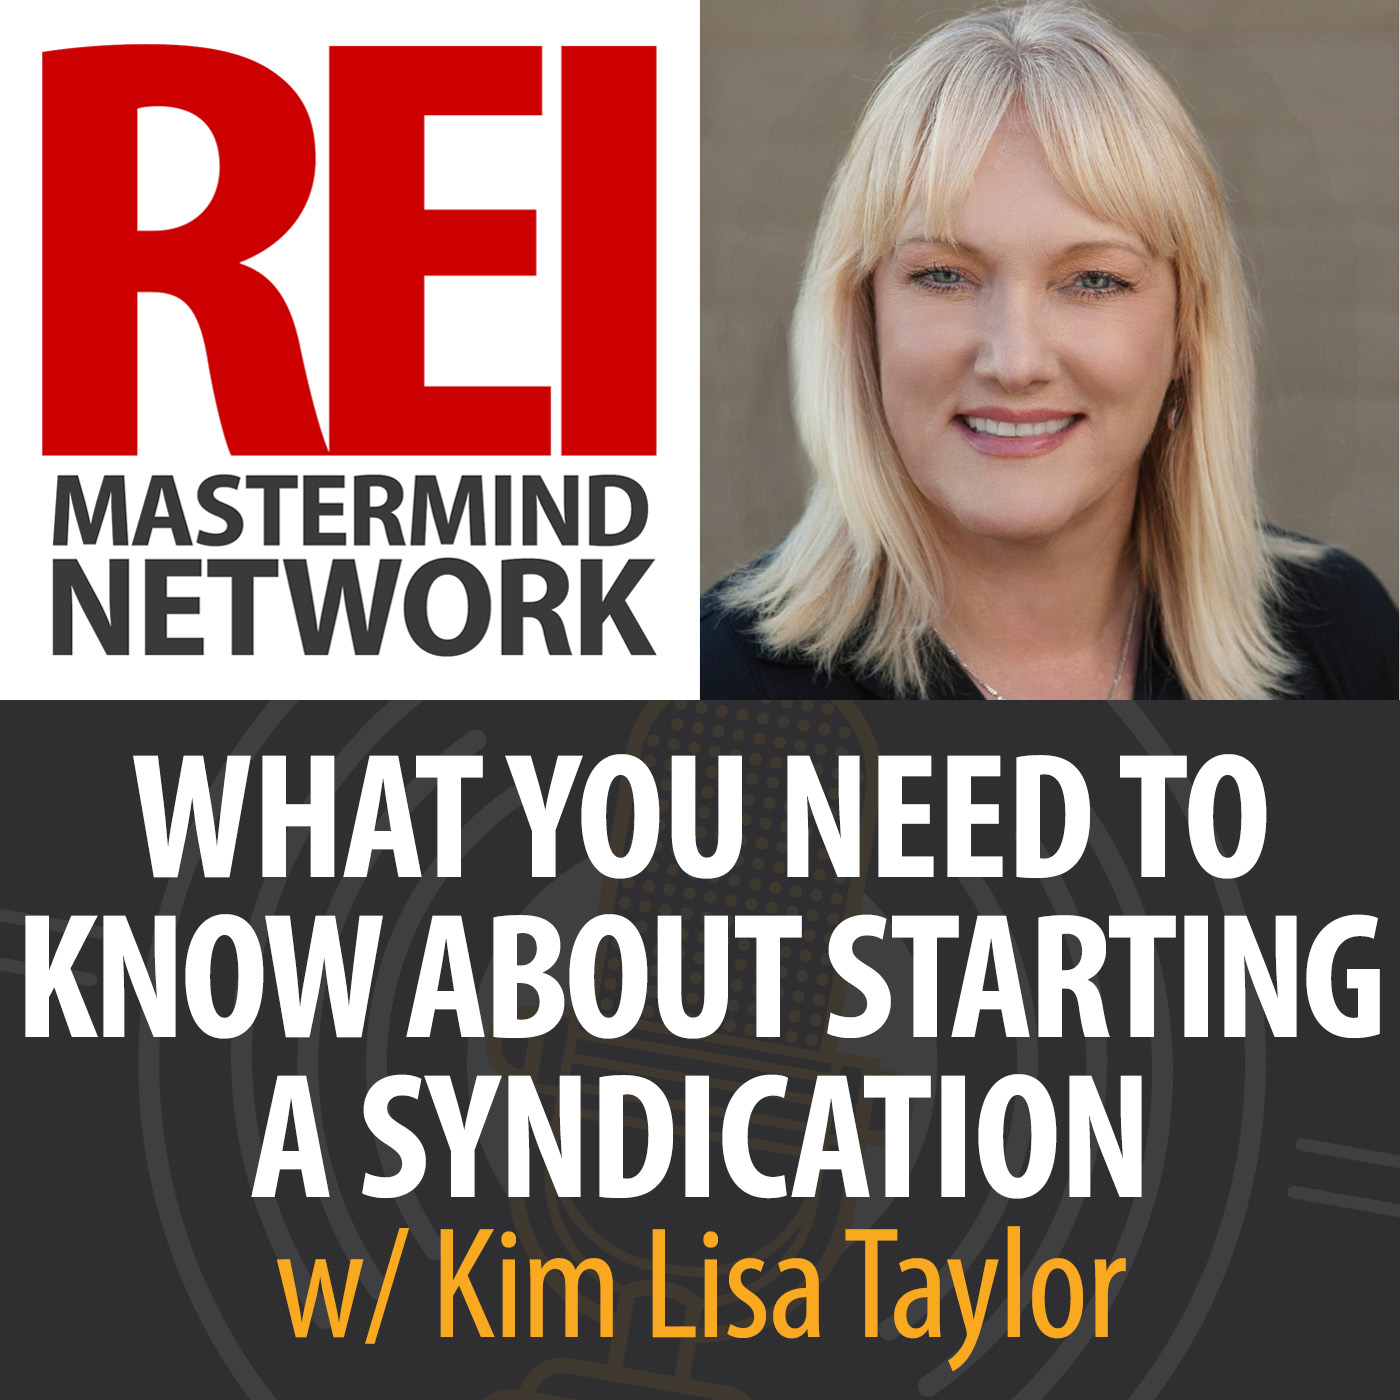 What You Need To Know About Starting A Syndication with Kim Lisa Taylor